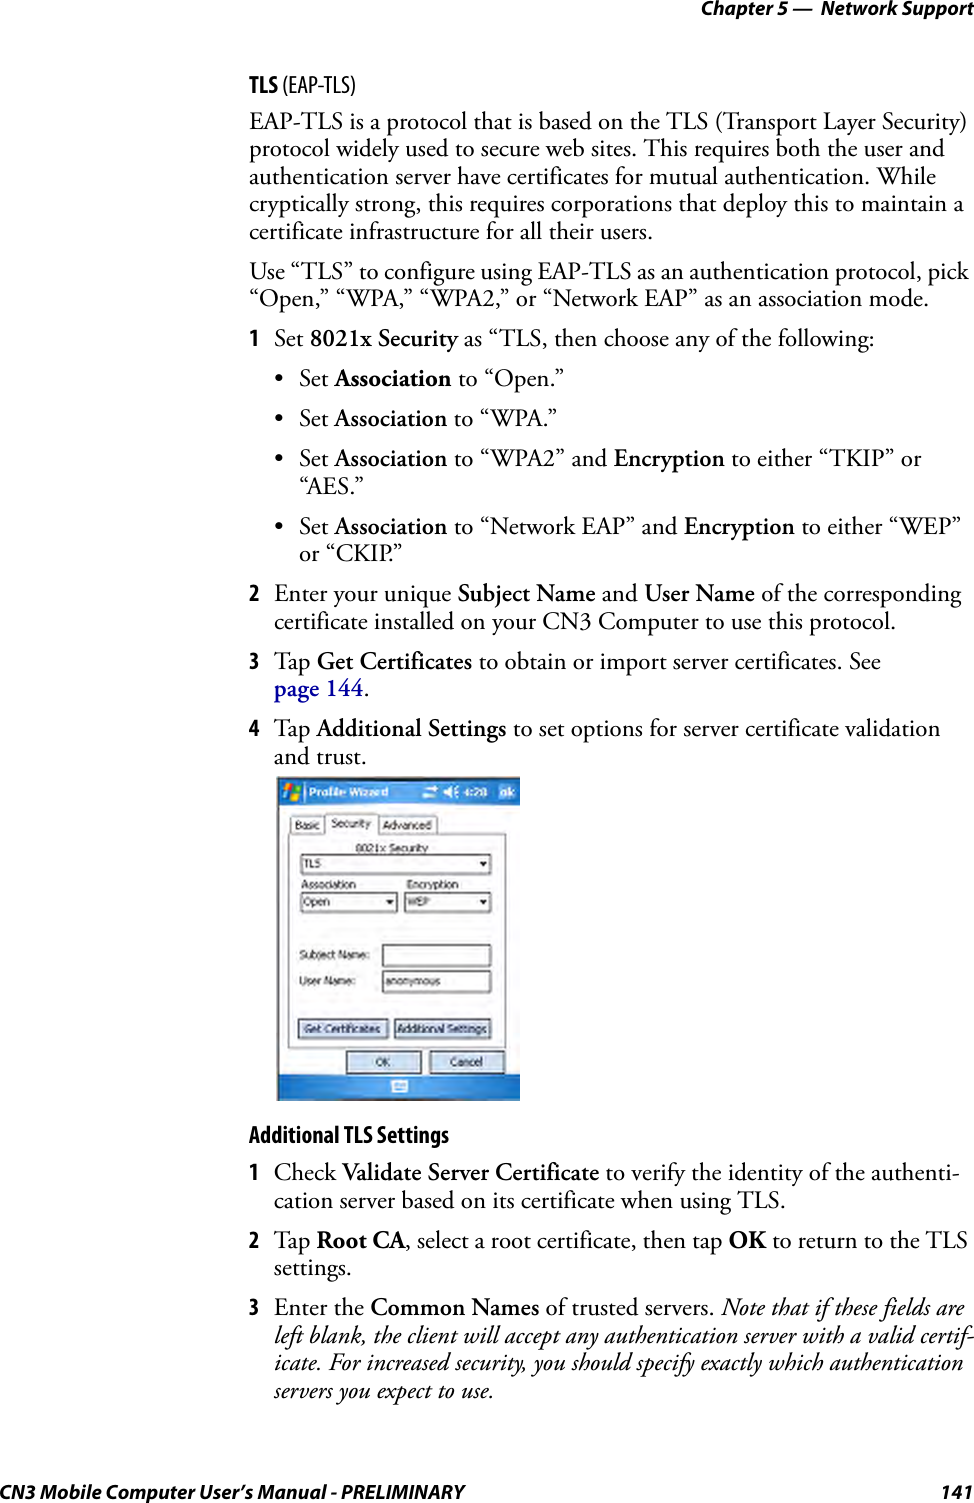 Chapter 5 —  Network SupportCN3 Mobile Computer User’s Manual - PRELIMINARY 141TLS (EAP-TLS)EAP-TLS is a protocol that is based on the TLS (Transport Layer Security) protocol widely used to secure web sites. This requires both the user and authentication server have certificates for mutual authentication. While cryptically strong, this requires corporations that deploy this to maintain a certificate infrastructure for all their users.Use “TLS” to configure using EAP-TLS as an authentication protocol, pick “Open,” “WPA,” “WPA2,” or “Network EAP” as an association mode.1Set 8021x Security as “TLS, then choose any of the following:•Set Association to “Open.”•Set Association to “WPA.”•Set Association to “WPA2” and Encryption to either “TKIP” or “AES.”•Set Association to “Network EAP” and Encryption to either “WEP” or “CKIP.”2Enter your unique Subject Name and User Name of the corresponding certificate installed on your CN3 Computer to use this protocol.3Tap  Get Certificates to obtain or import server certificates. See page 144.4Tap  Additional Settings to set options for server certificate validation and trust.Additional TLS Settings1Check Validate Server Certificate to verify the identity of the authenti-cation server based on its certificate when using TLS.2Tap Root CA, select a root certificate, then tap OK to return to the TLS settings.3Enter the Common Names of trusted servers. Note that if these fields are left blank, the client will accept any authentication server with a valid certif-icate. For increased security, you should specify exactly which authentication servers you expect to use.